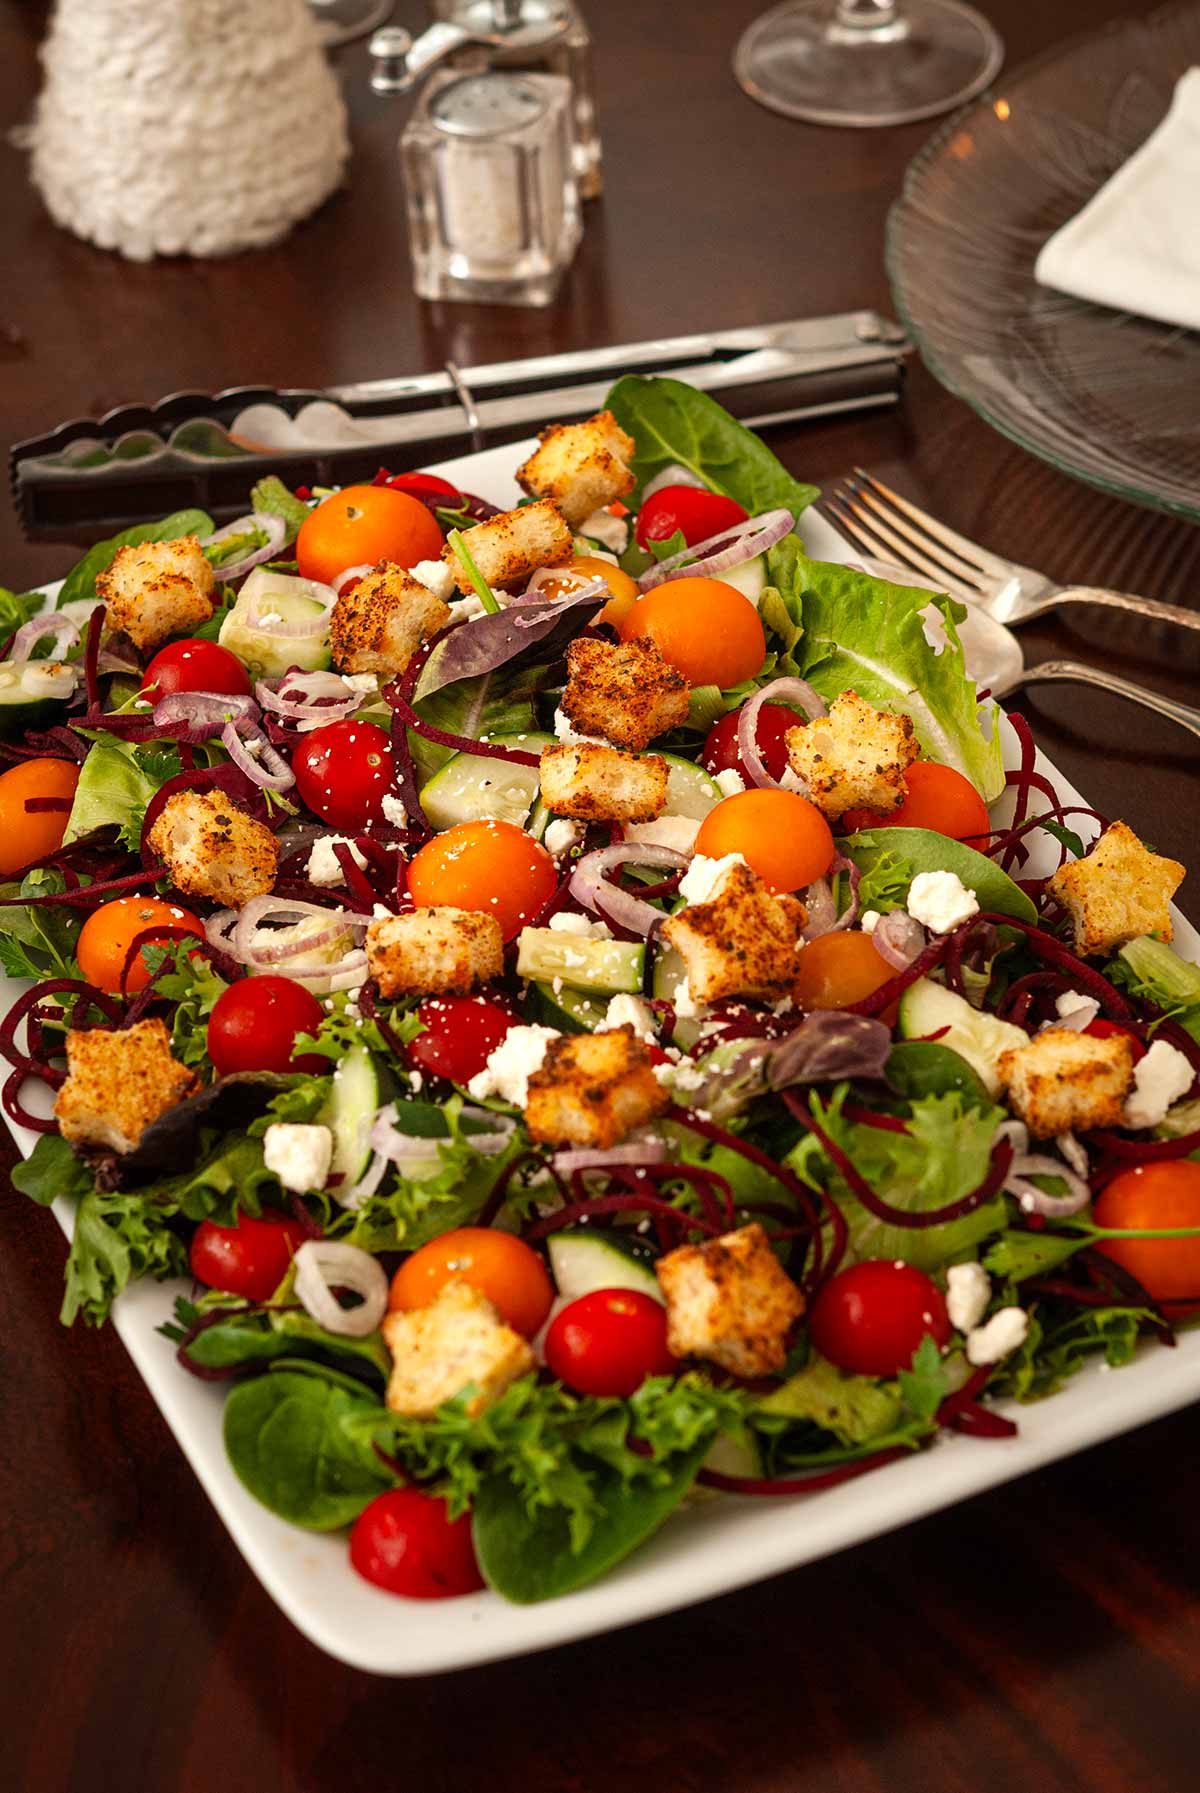 A festive salad with star-shaped croutons on a set dining table.